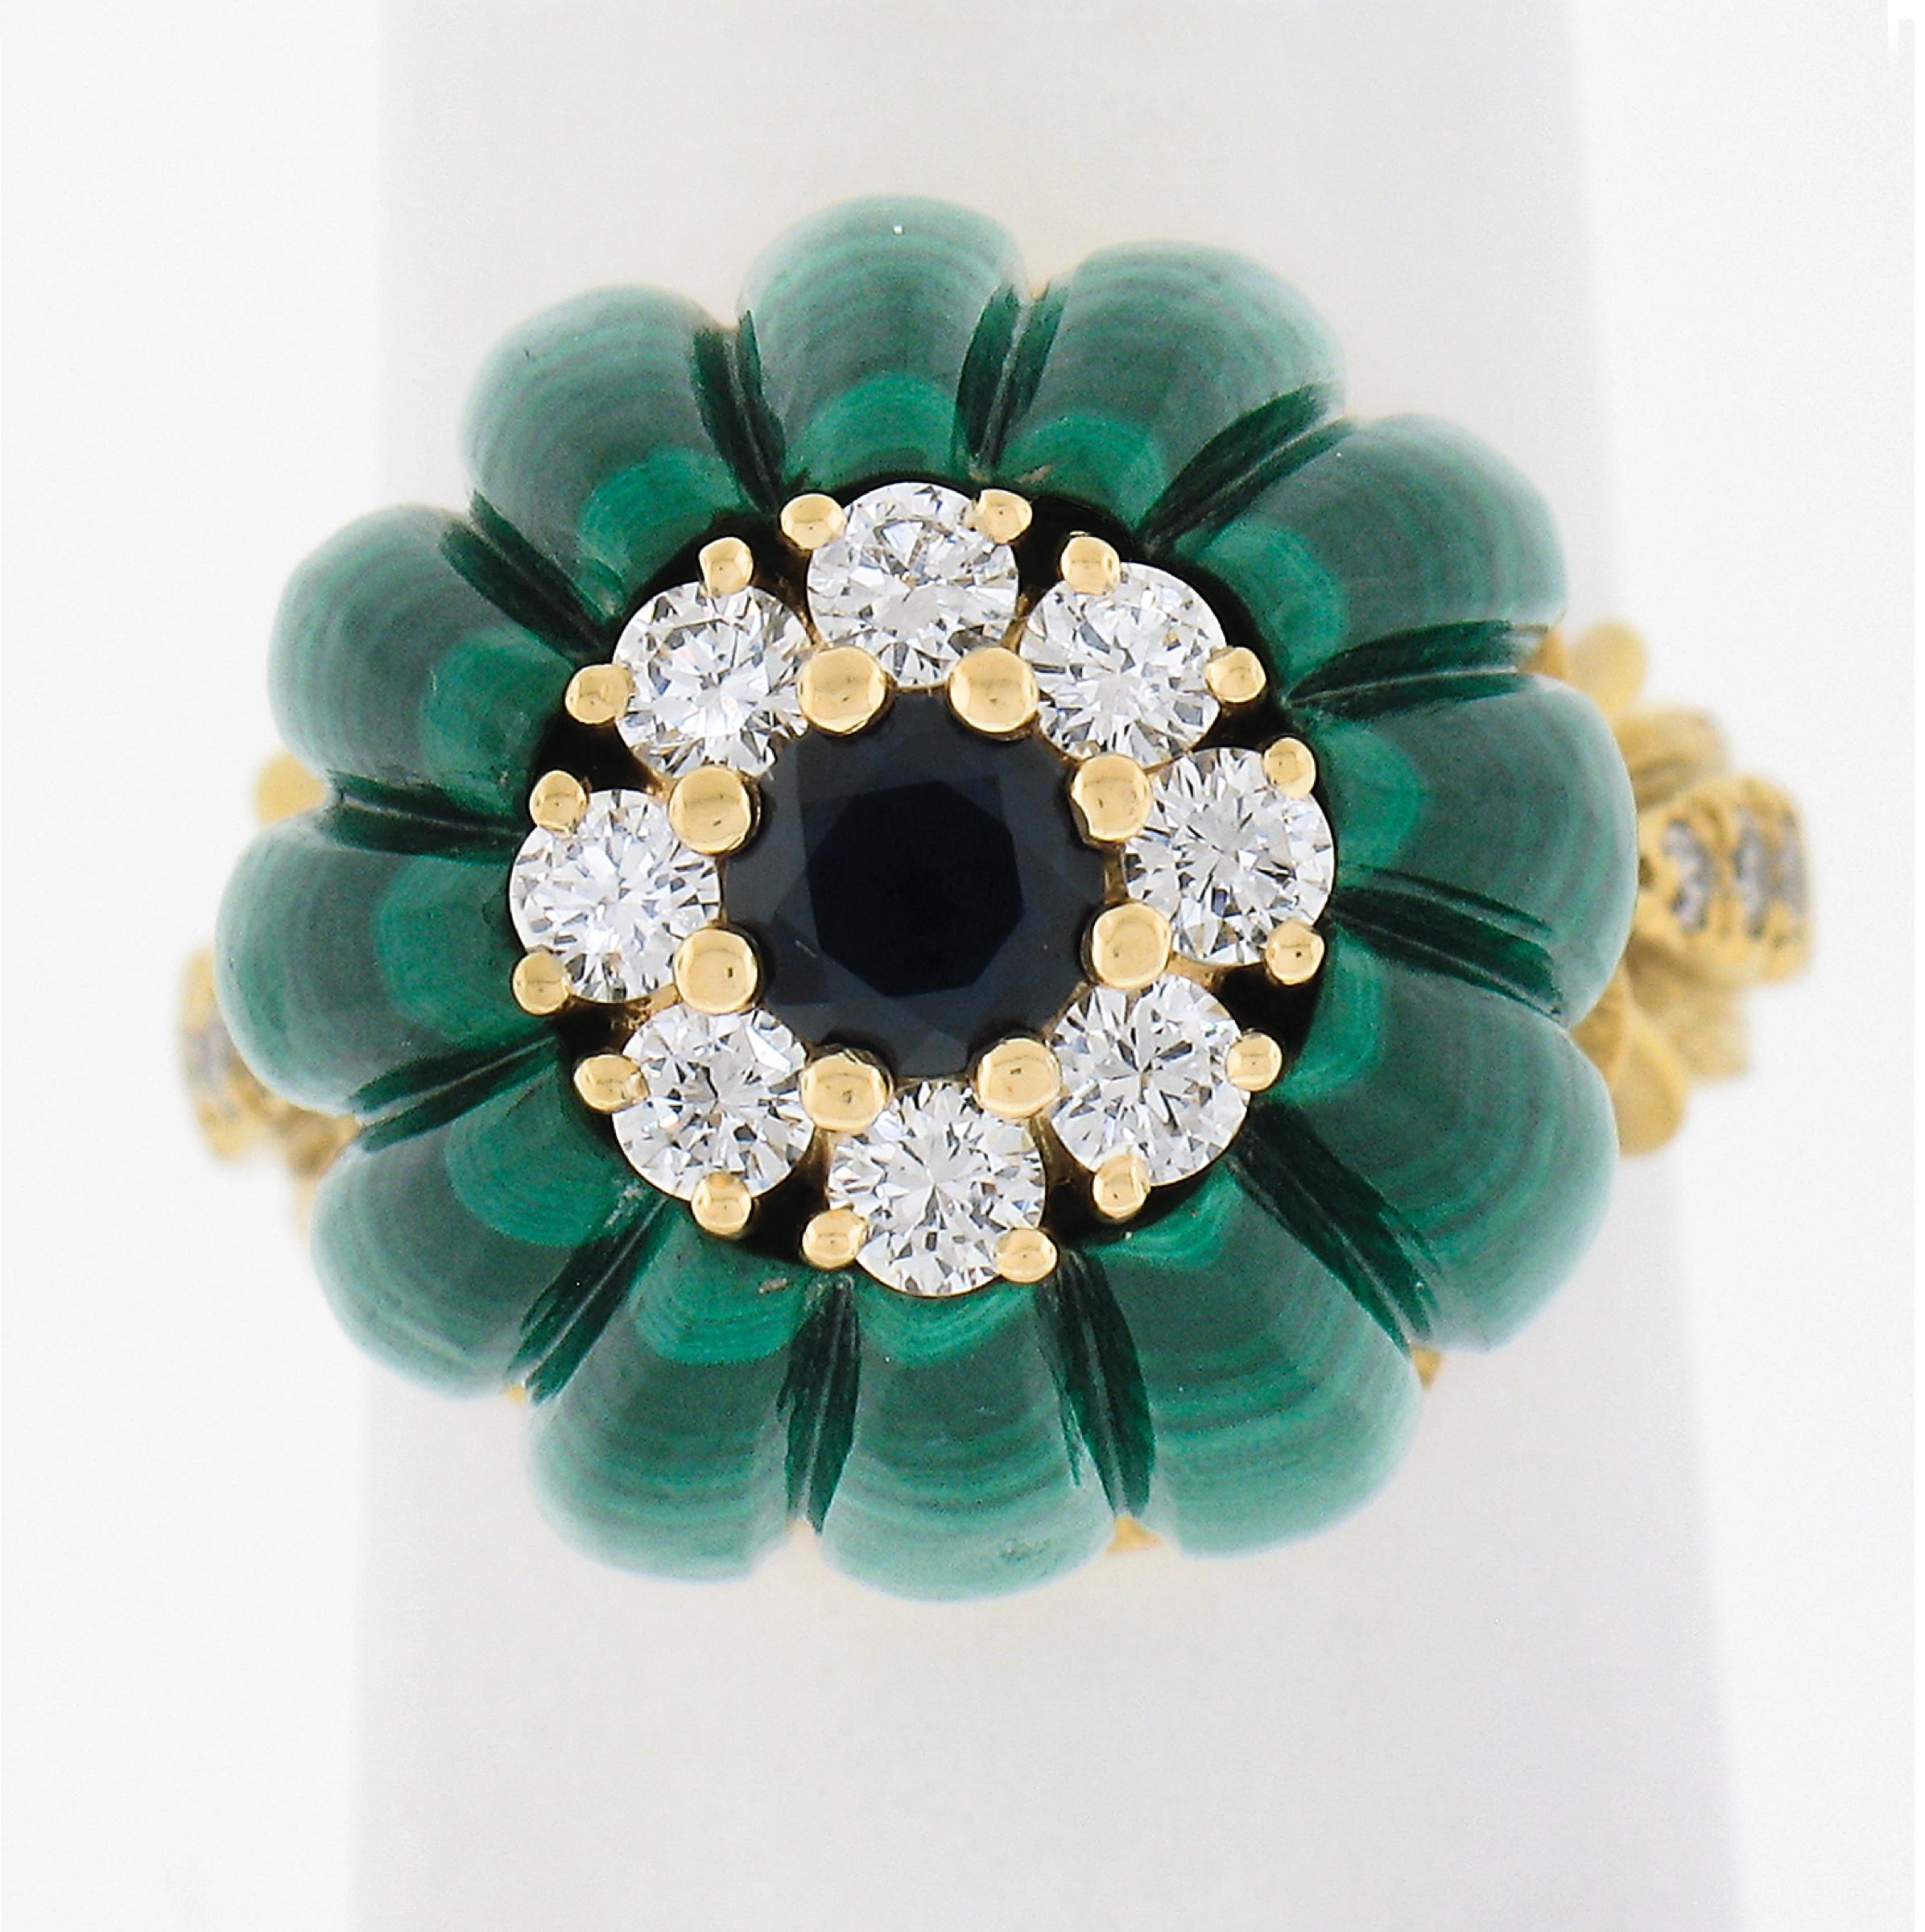 --Stone(s):--
(1) Natural Genuine Malachites - Carved Sphere Shape - Medium to Dark Green Colors - 17.2mm (approx.)
(14) Natural Genuine Diamonds - Round Brilliant & Single Cut - Pavé & Prong Set - F/G Color - VS1/VS2 Clarity - 0.50ctw (approx.)
(1)